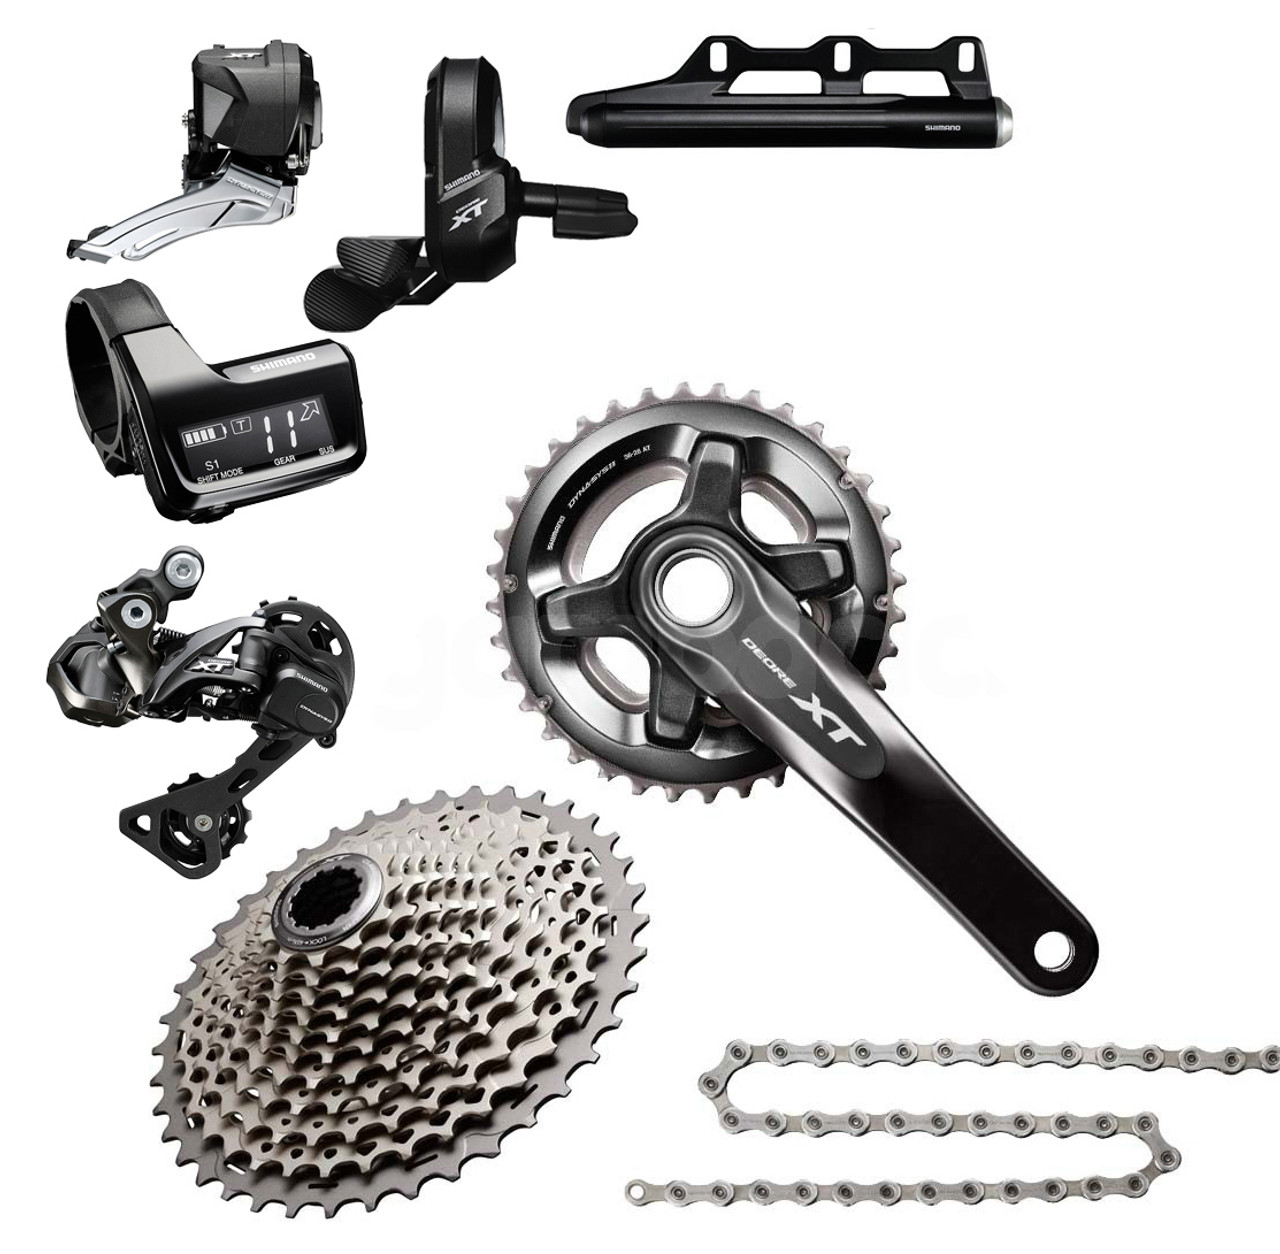 Texas Cyclesport Shimano XT 8050 Di2 Groupset with M8000 Chainrings (less  brake levers & calipers) XTR-8050-7D 1292.99 New